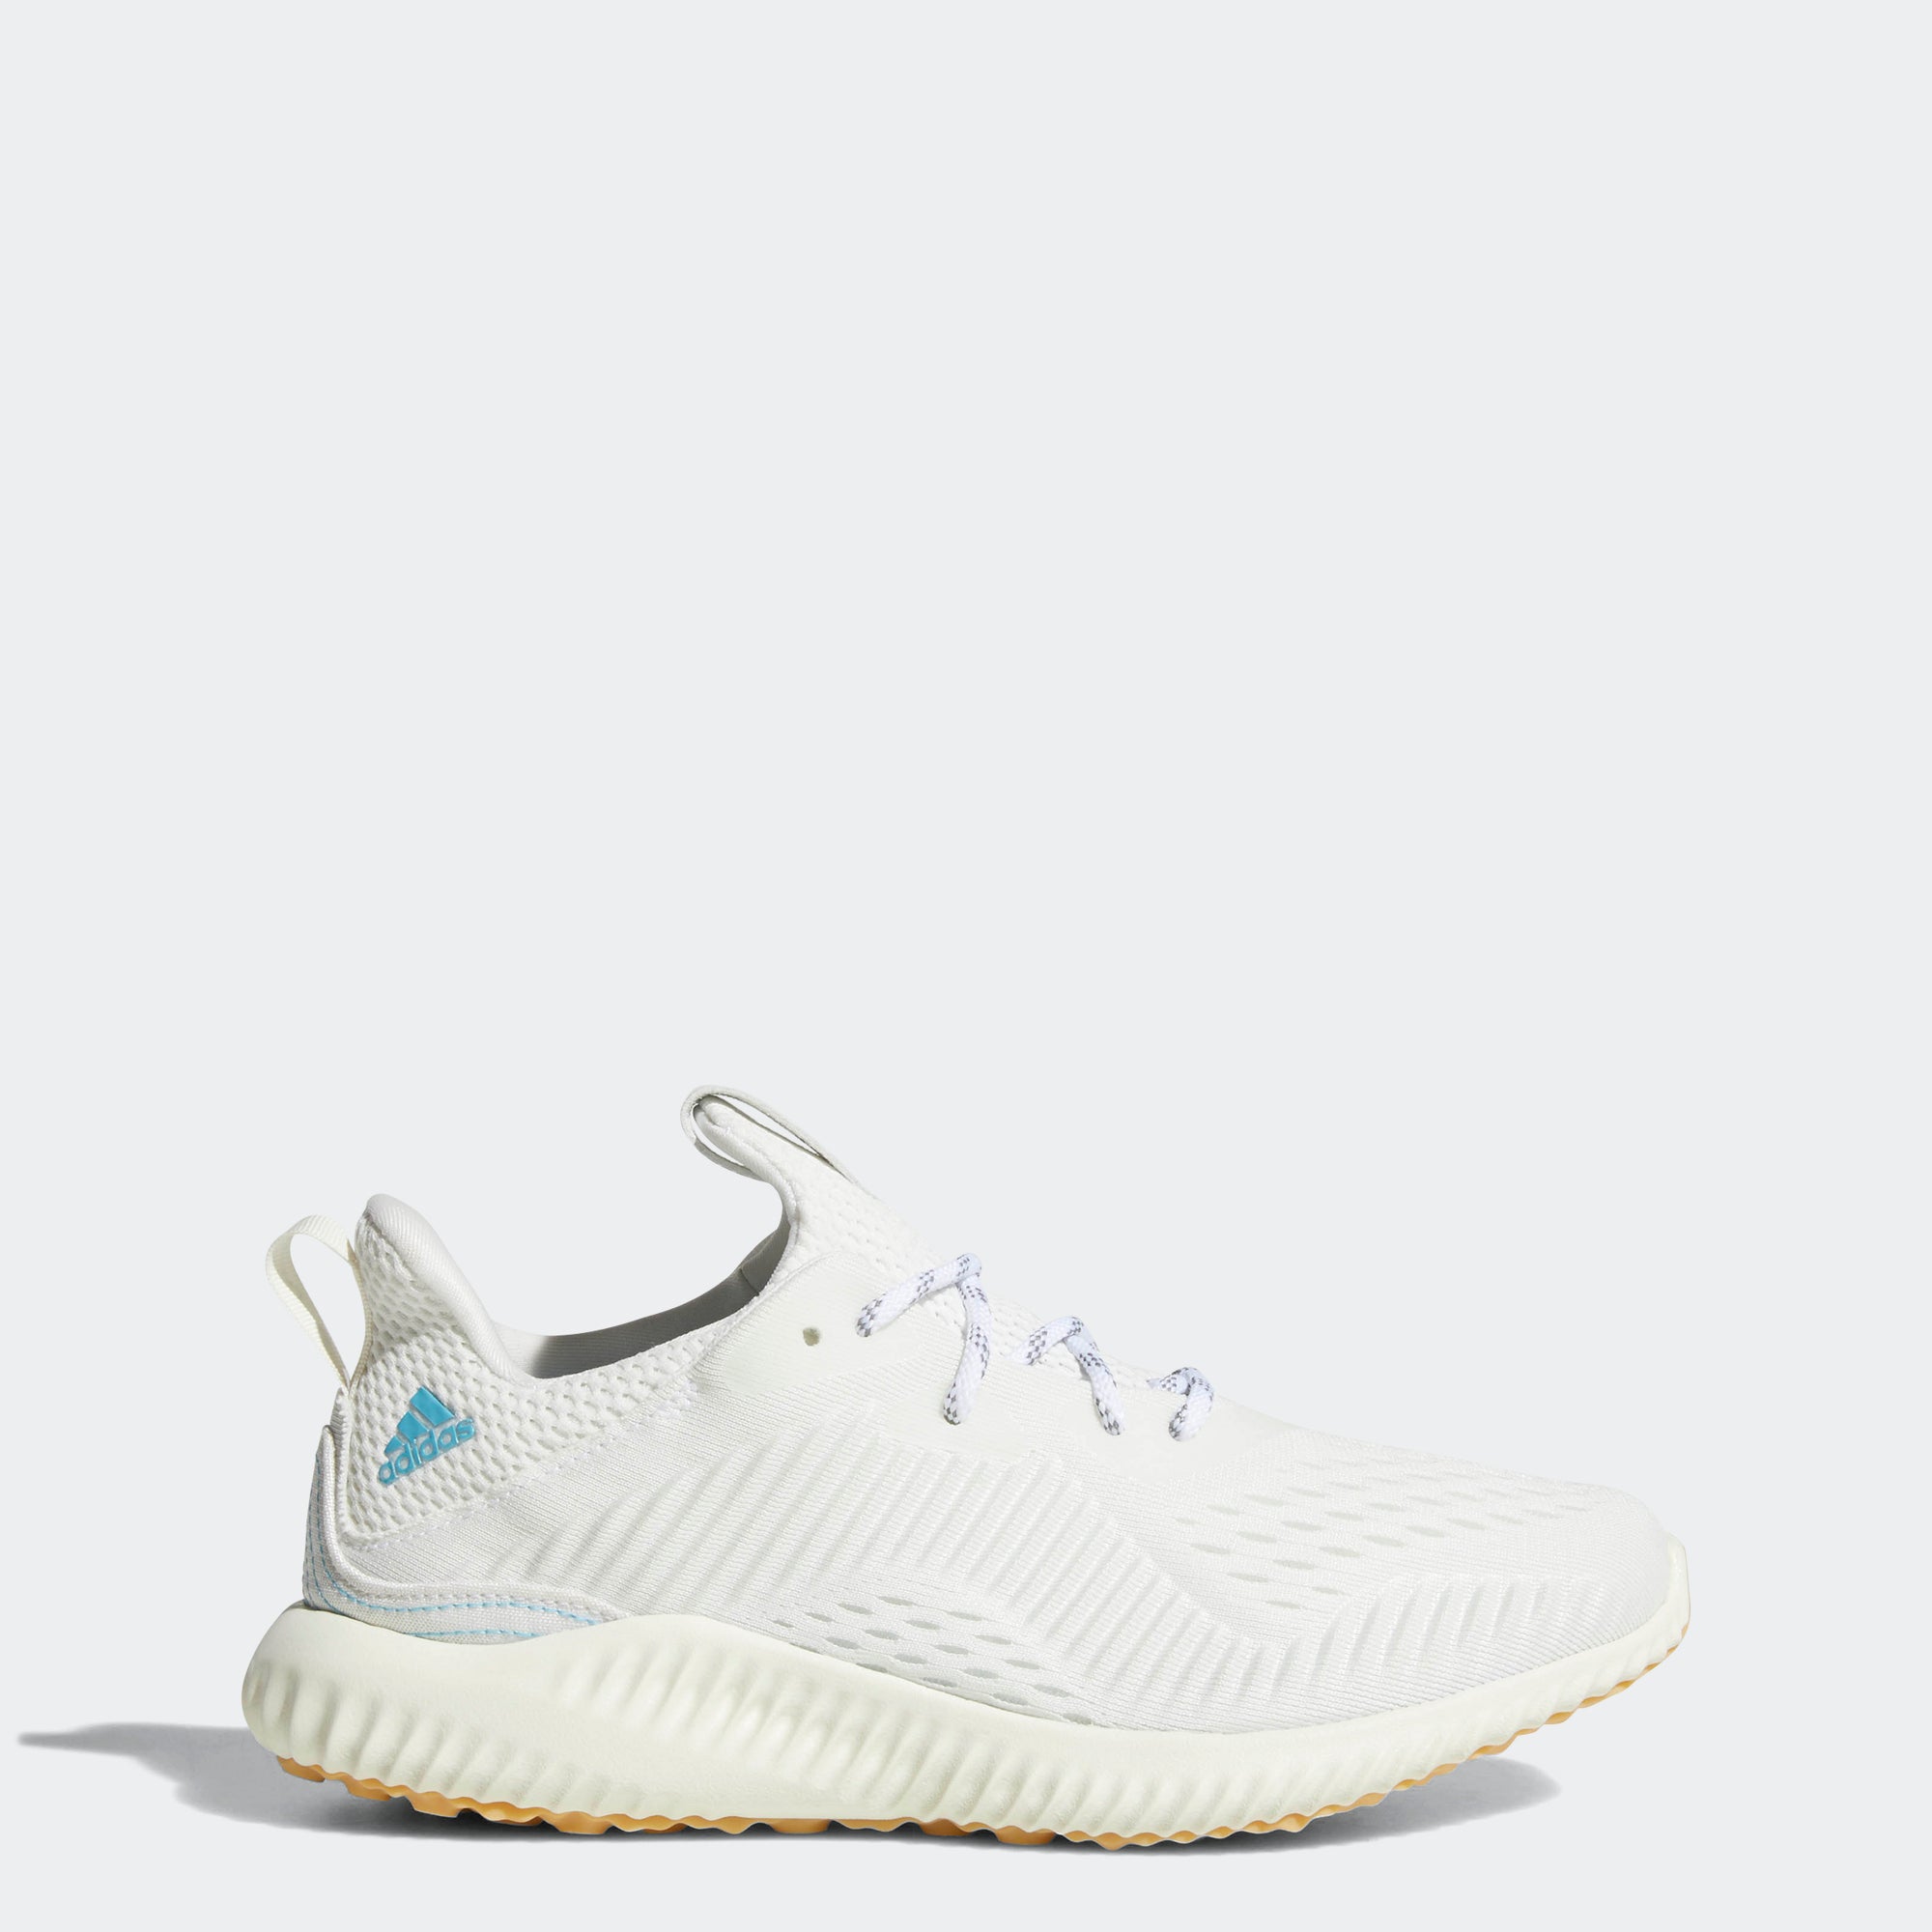 Parley Shoes Non Dyed White DA9992 